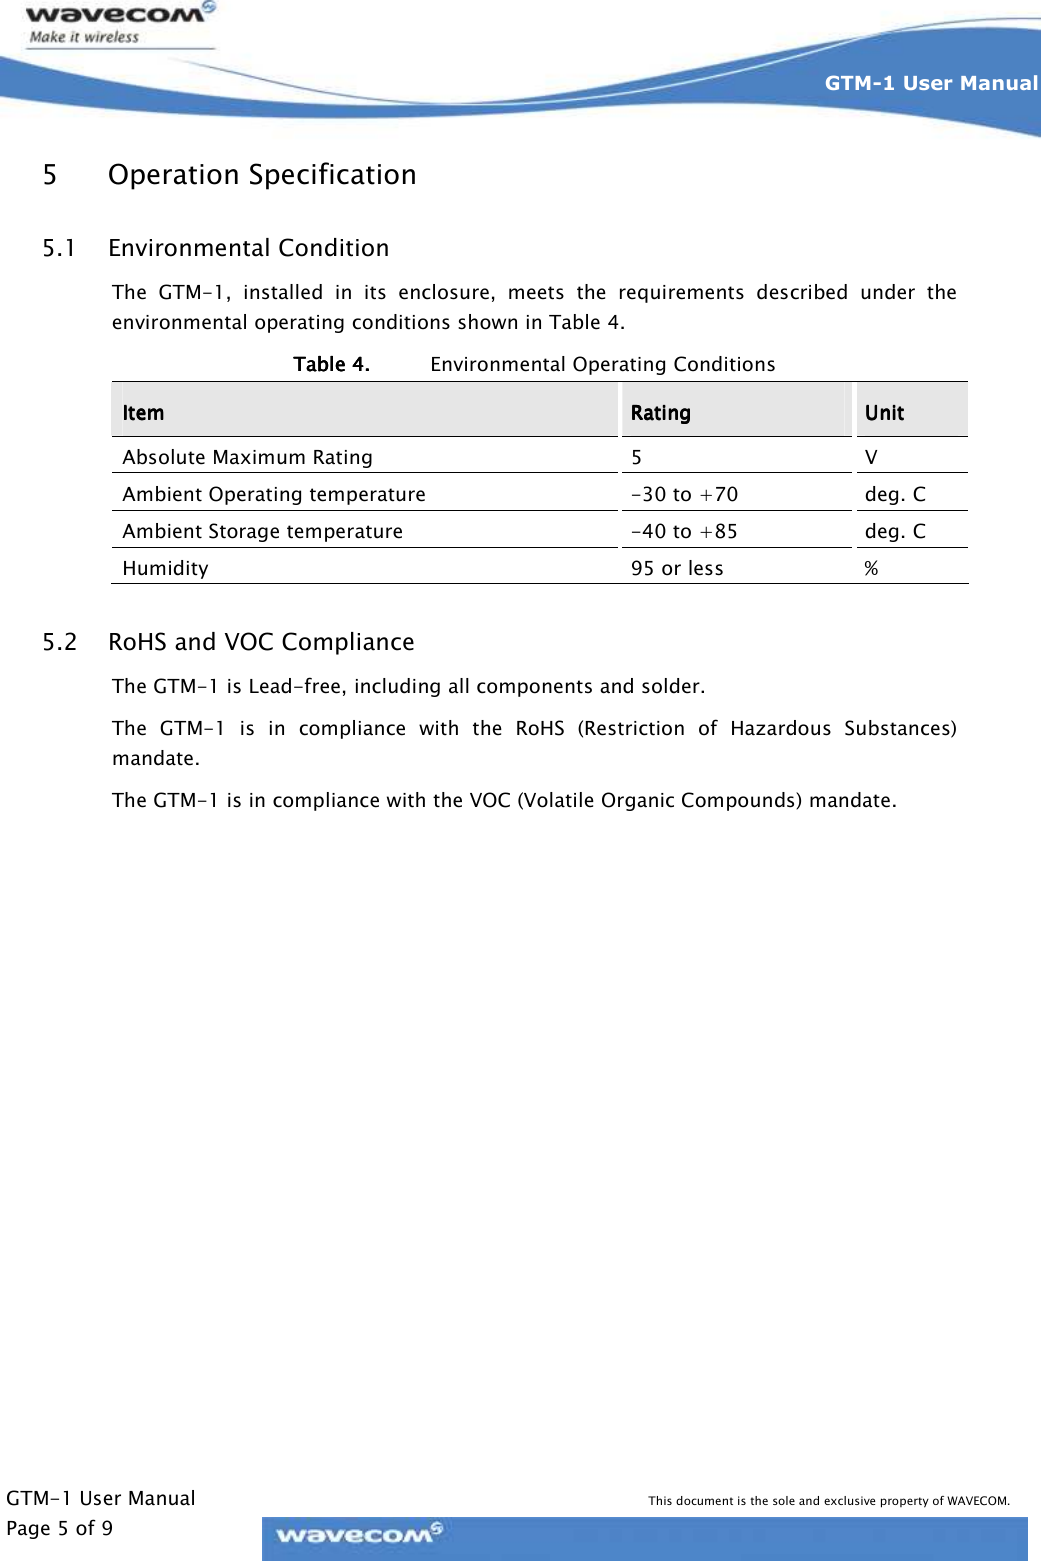     GTM-1 User Manual This document is the sole and exclusive property of WAVECOM. Page 5 of 9 GTM-1 User Manual    5 Operation Specification 5.1 Environmental Condition The  GTM-1,  installed  in  its  enclosure,  meets  the  requirements  described  under  the environmental operating conditions shown in Table 4. Table 4.Table 4.Table 4.Table 4. Environmental Operating Conditions ItemItemItemItem     RatingRatingRatingRating     UnitUnitUnitUnit    Absolute Maximum Rating  5  V Ambient Operating temperature  -30 to +70  deg. C Ambient Storage temperature  -40 to +85  deg. C Humidity  95 or less  % 5.2 RoHS and VOC Compliance The GTM-1 is Lead-free, including all components and solder. The  GTM-1  is  in  compliance  with  the  RoHS  (Restriction  of  Hazardous  Substances) mandate. The GTM-1 is in compliance with the VOC (Volatile Organic Compounds) mandate.  